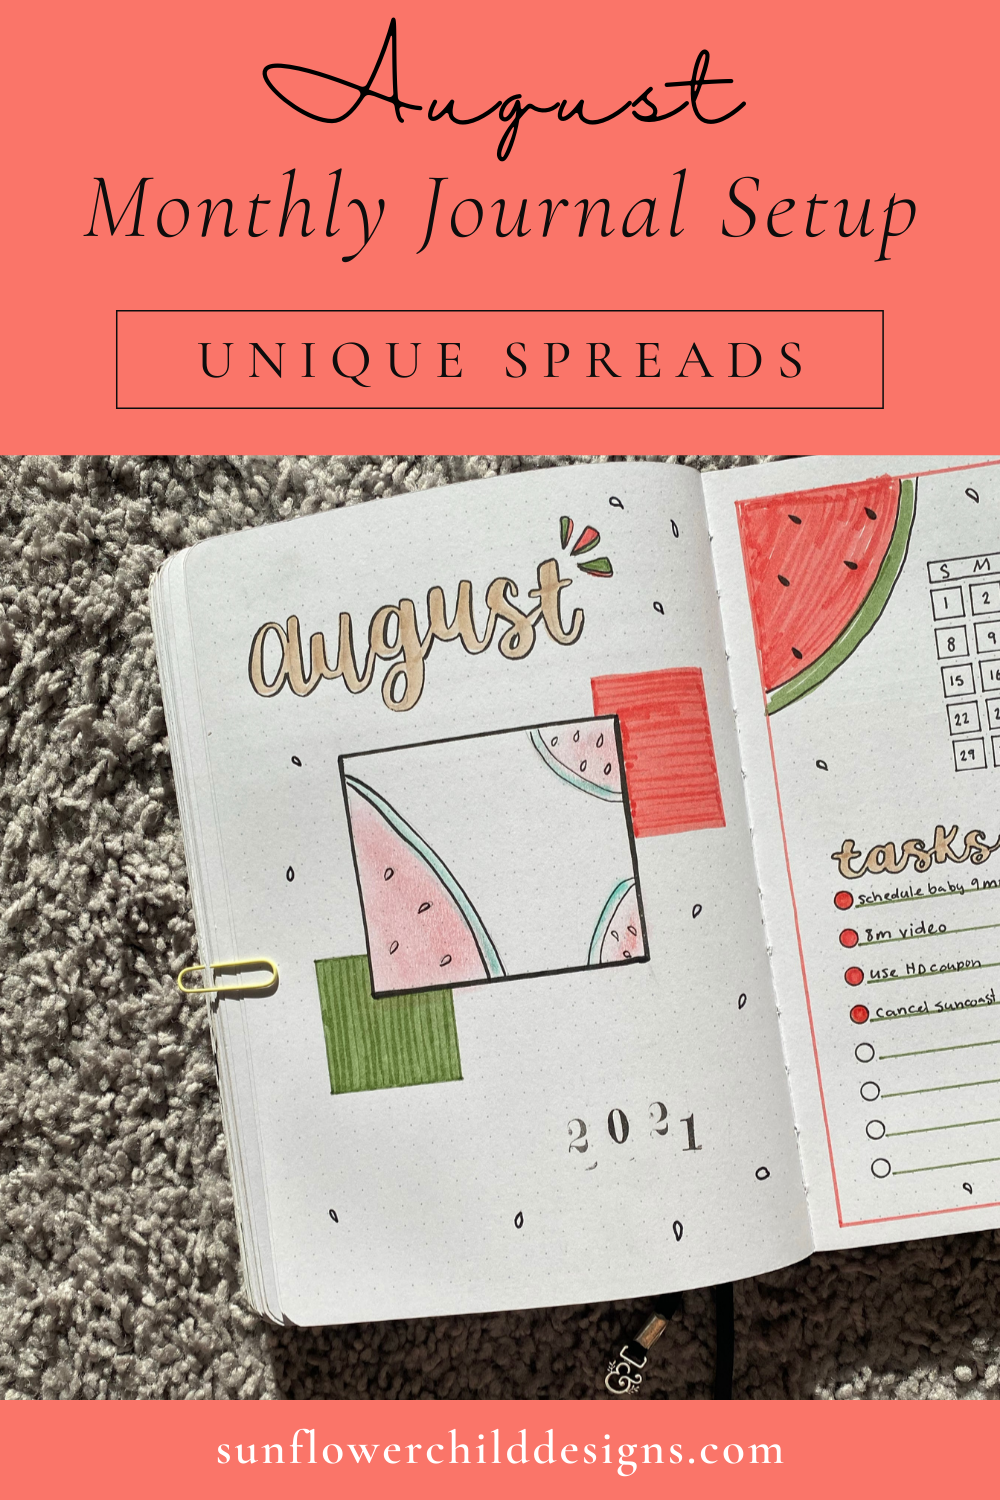 Make Your Own Bullet Journal Stencil - So Not Together